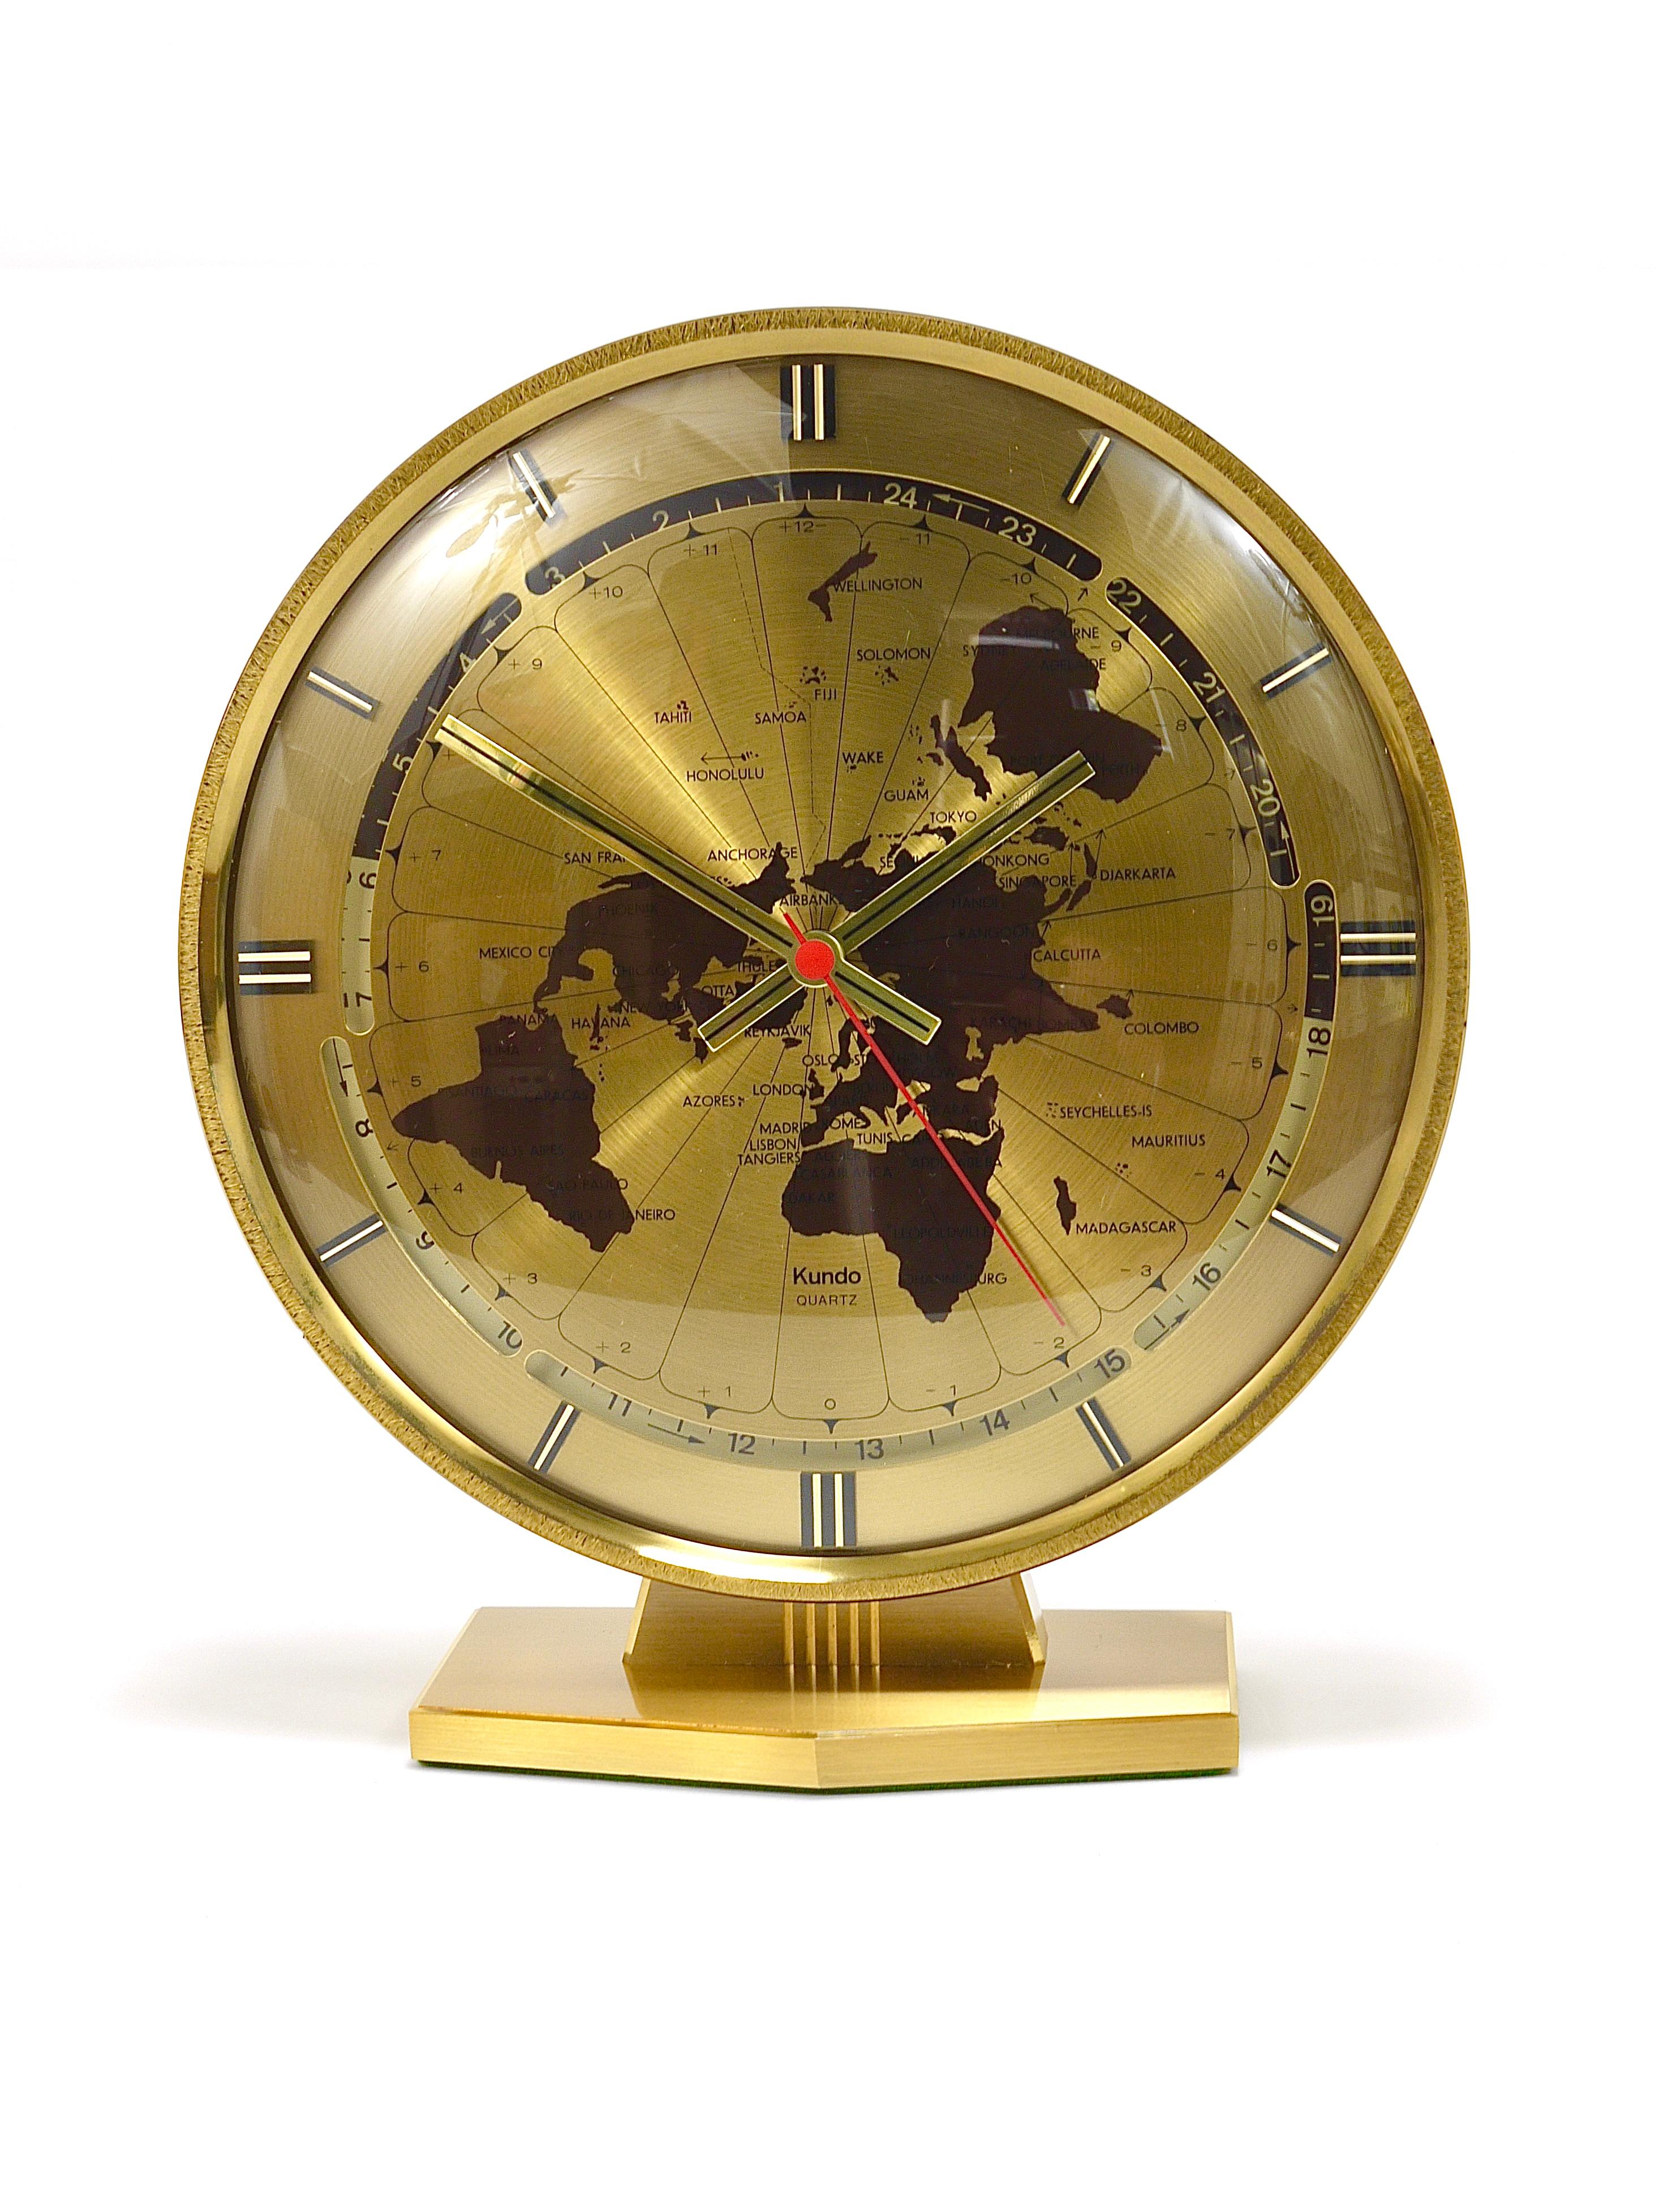 Large Kundo GMT World Time Zone Brass Table Clock, Kieninger & Obergfell, 1960s In Good Condition For Sale In Vienna, AT